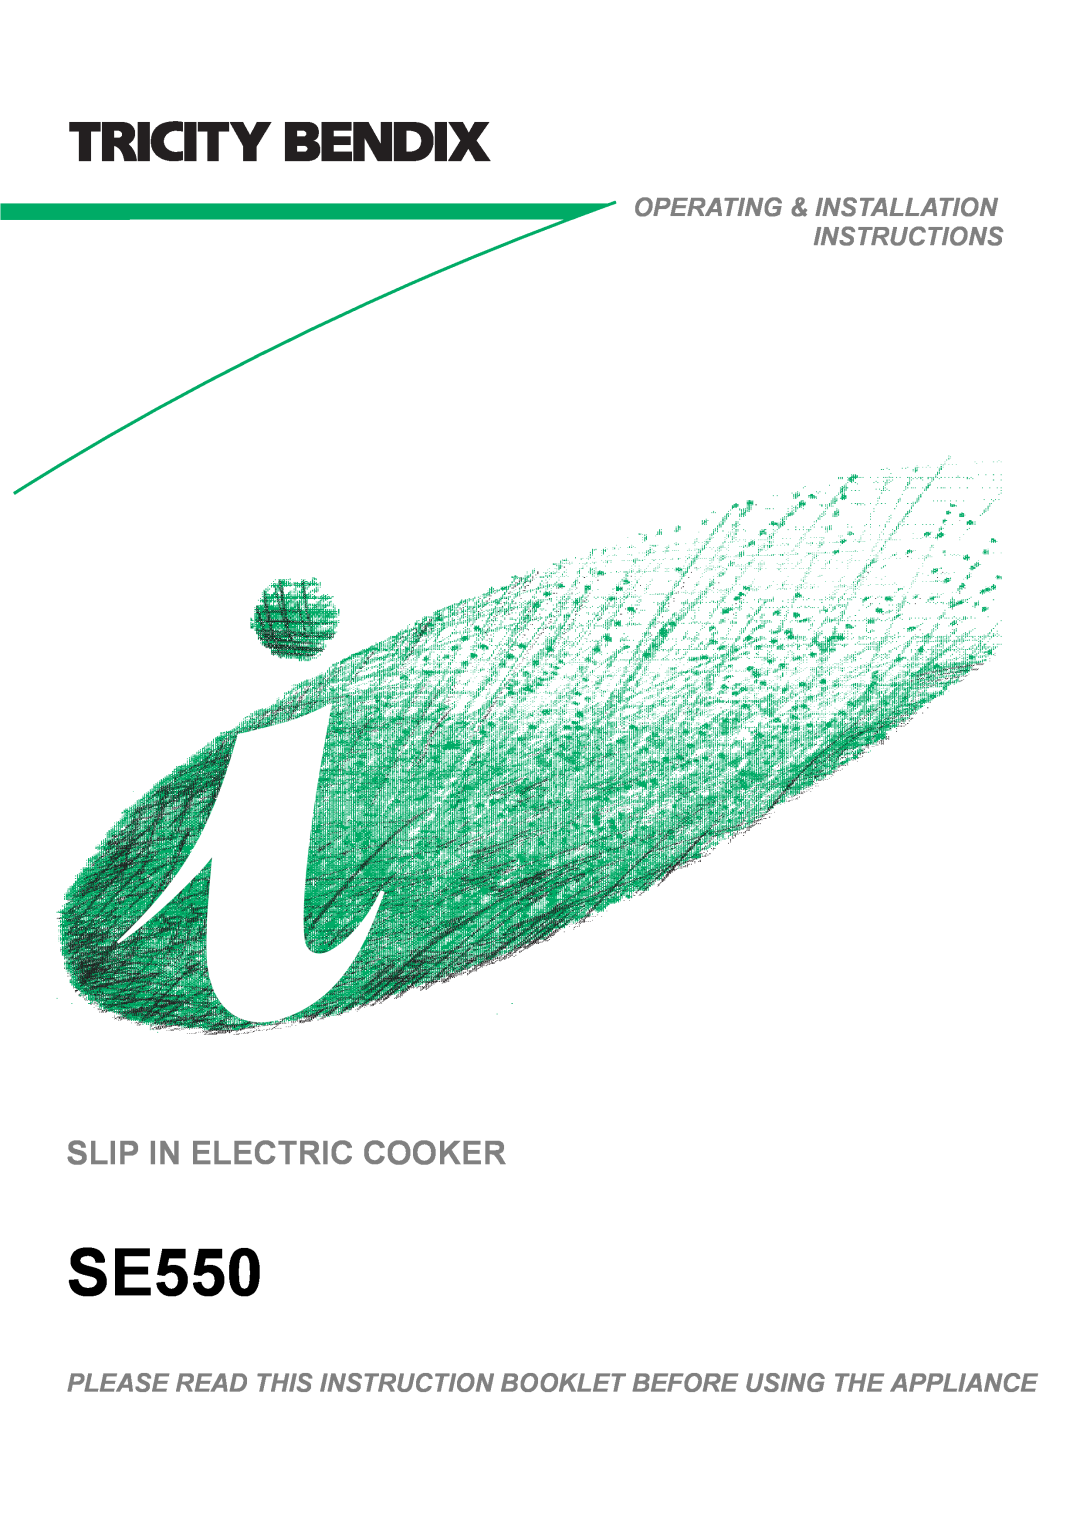 Tricity Bendix SE550 installation instructions Slip In Electric Cooker, Operating & Installation Instructions 